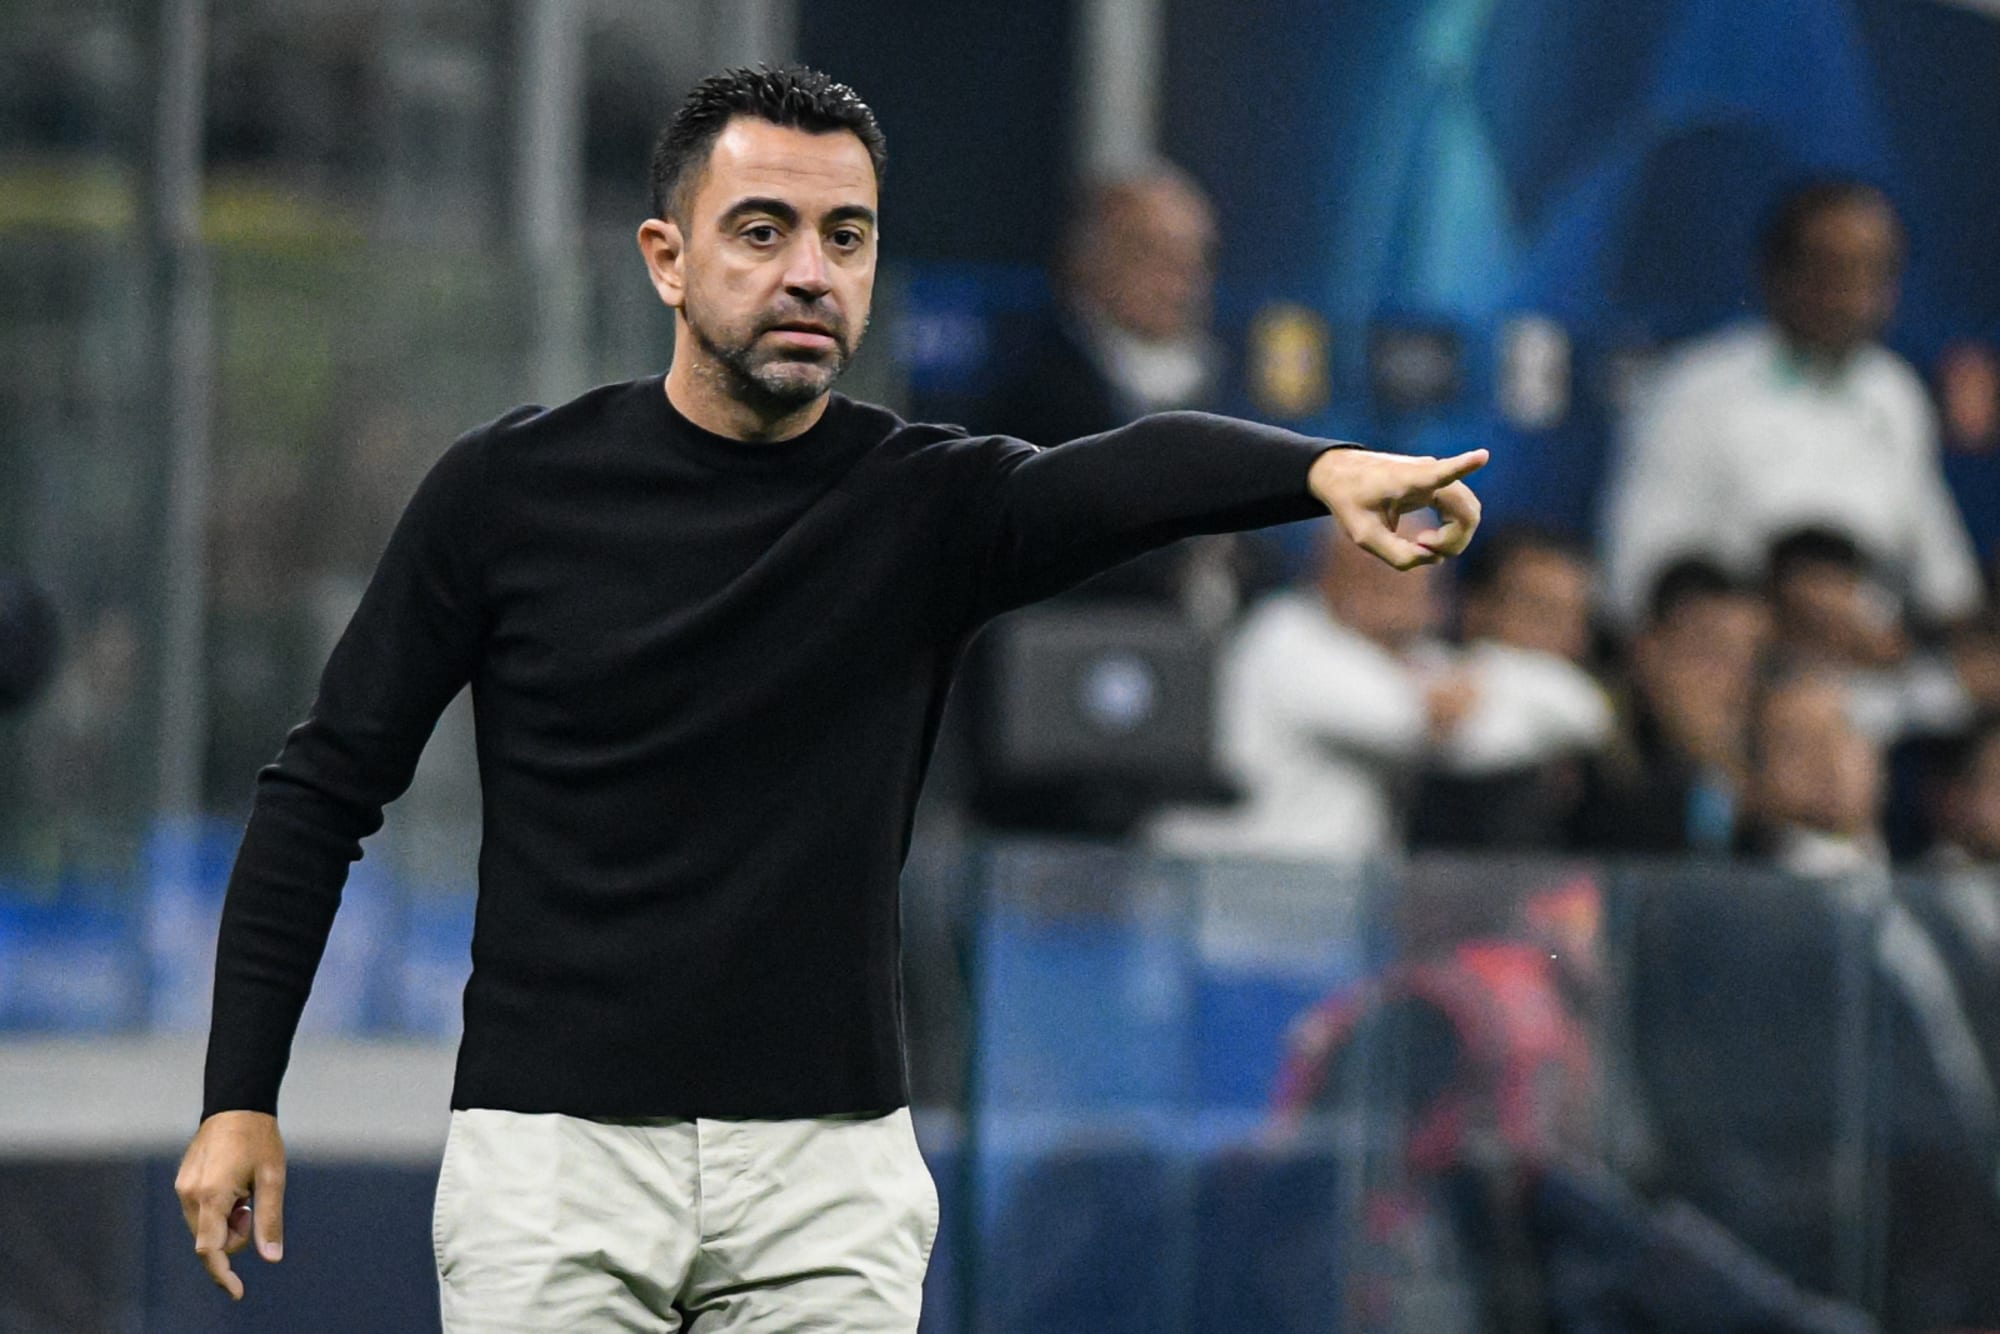 Xavi left fuming after non-penalty call against Inter Milan